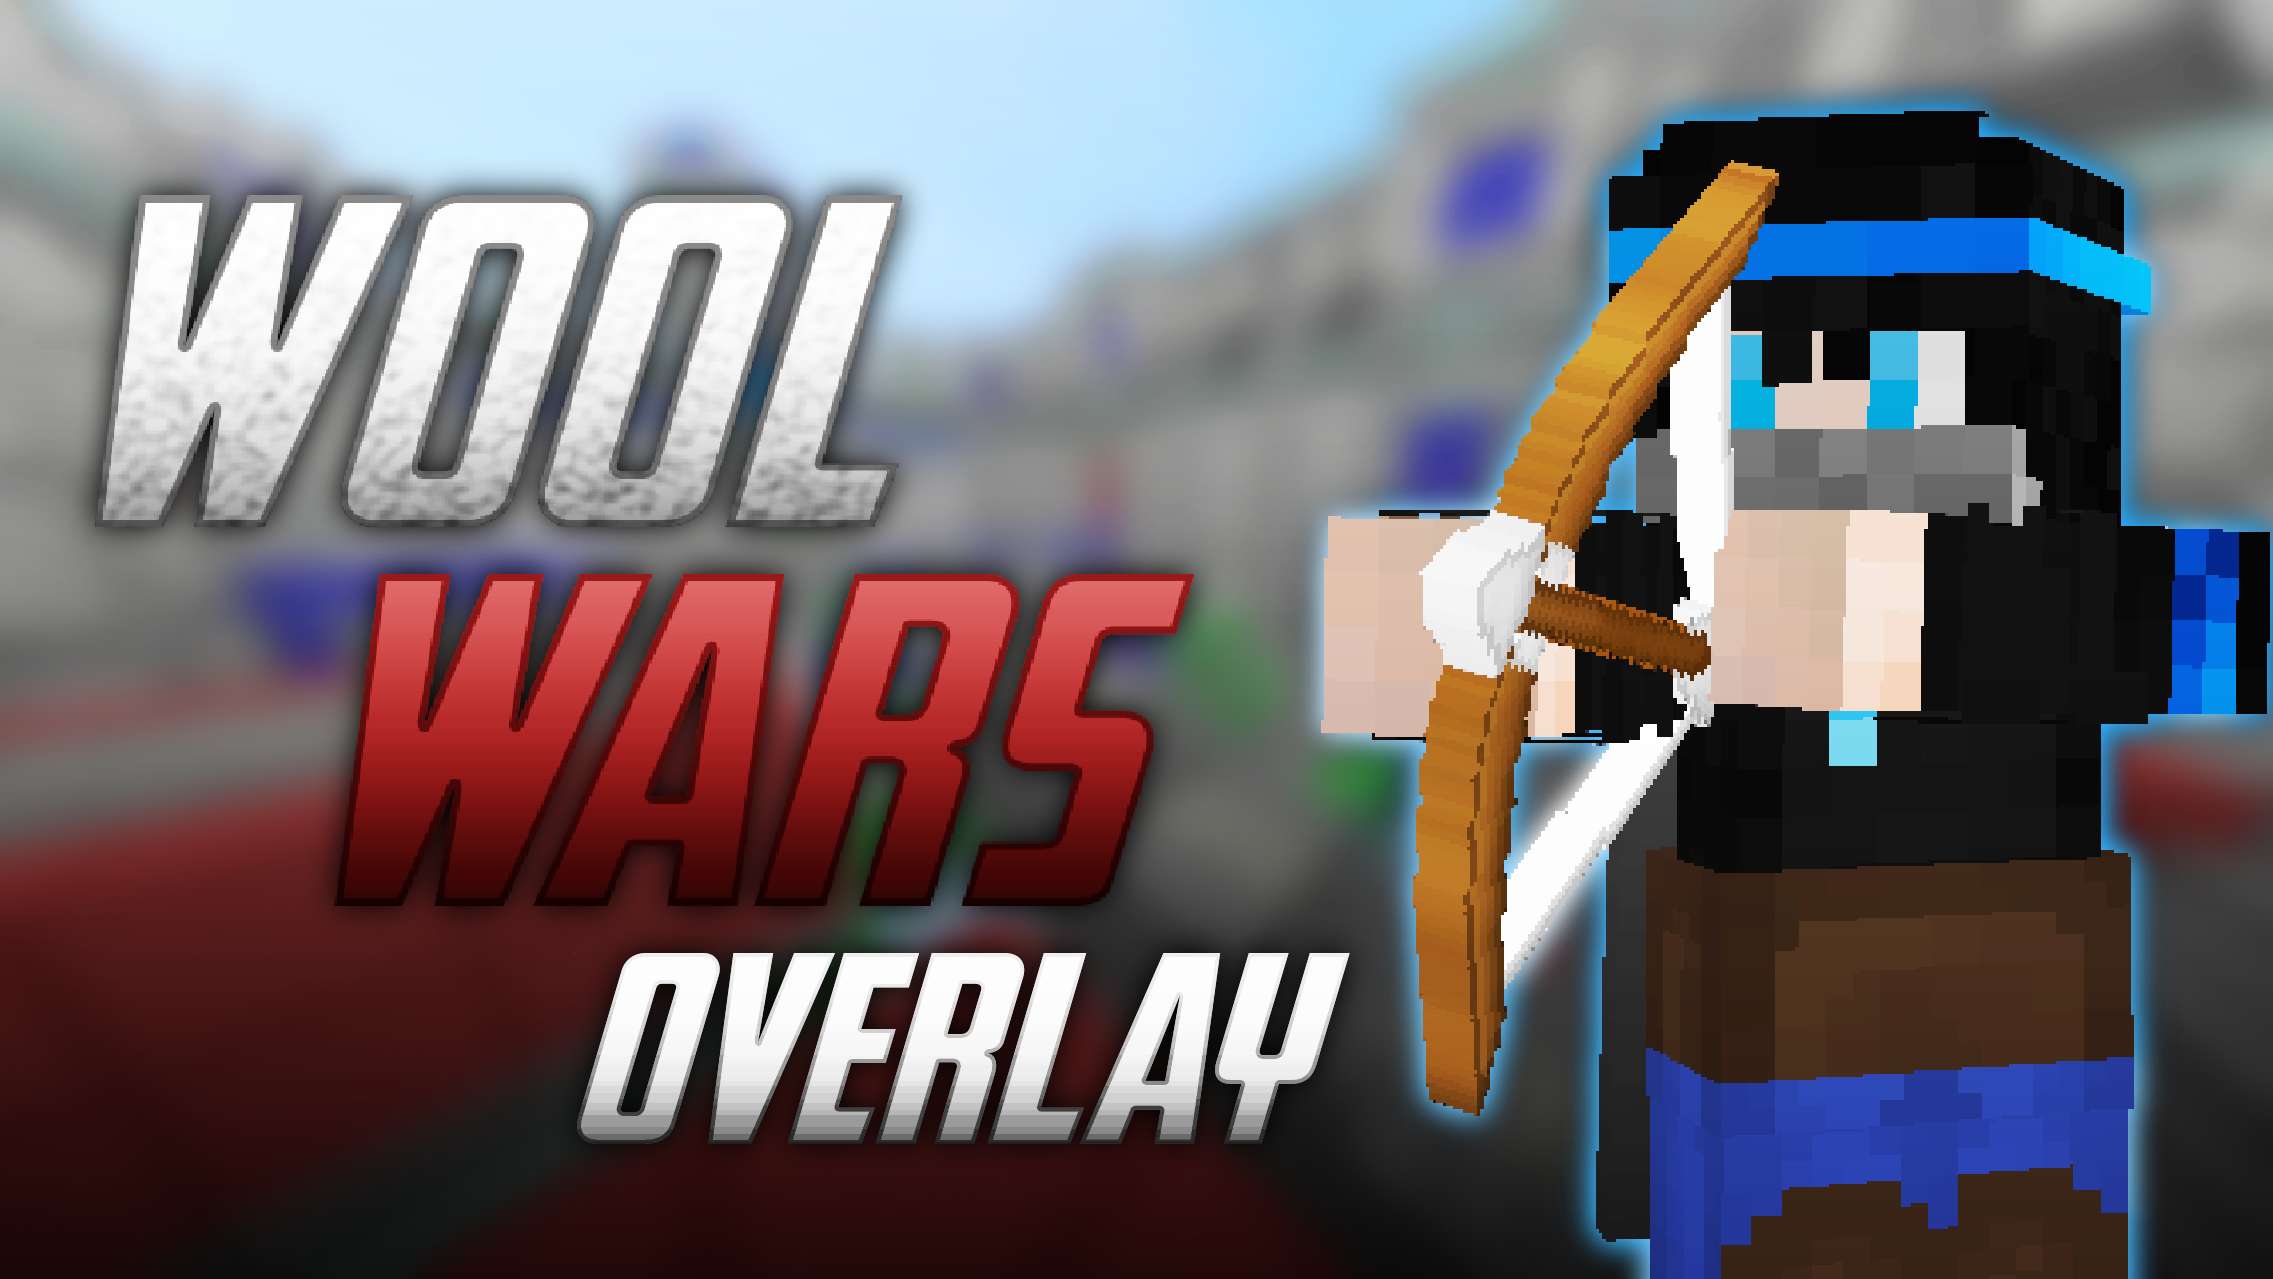 Wool Wars Overlay | Timepass 600 64 by Mqryo on PvPRP